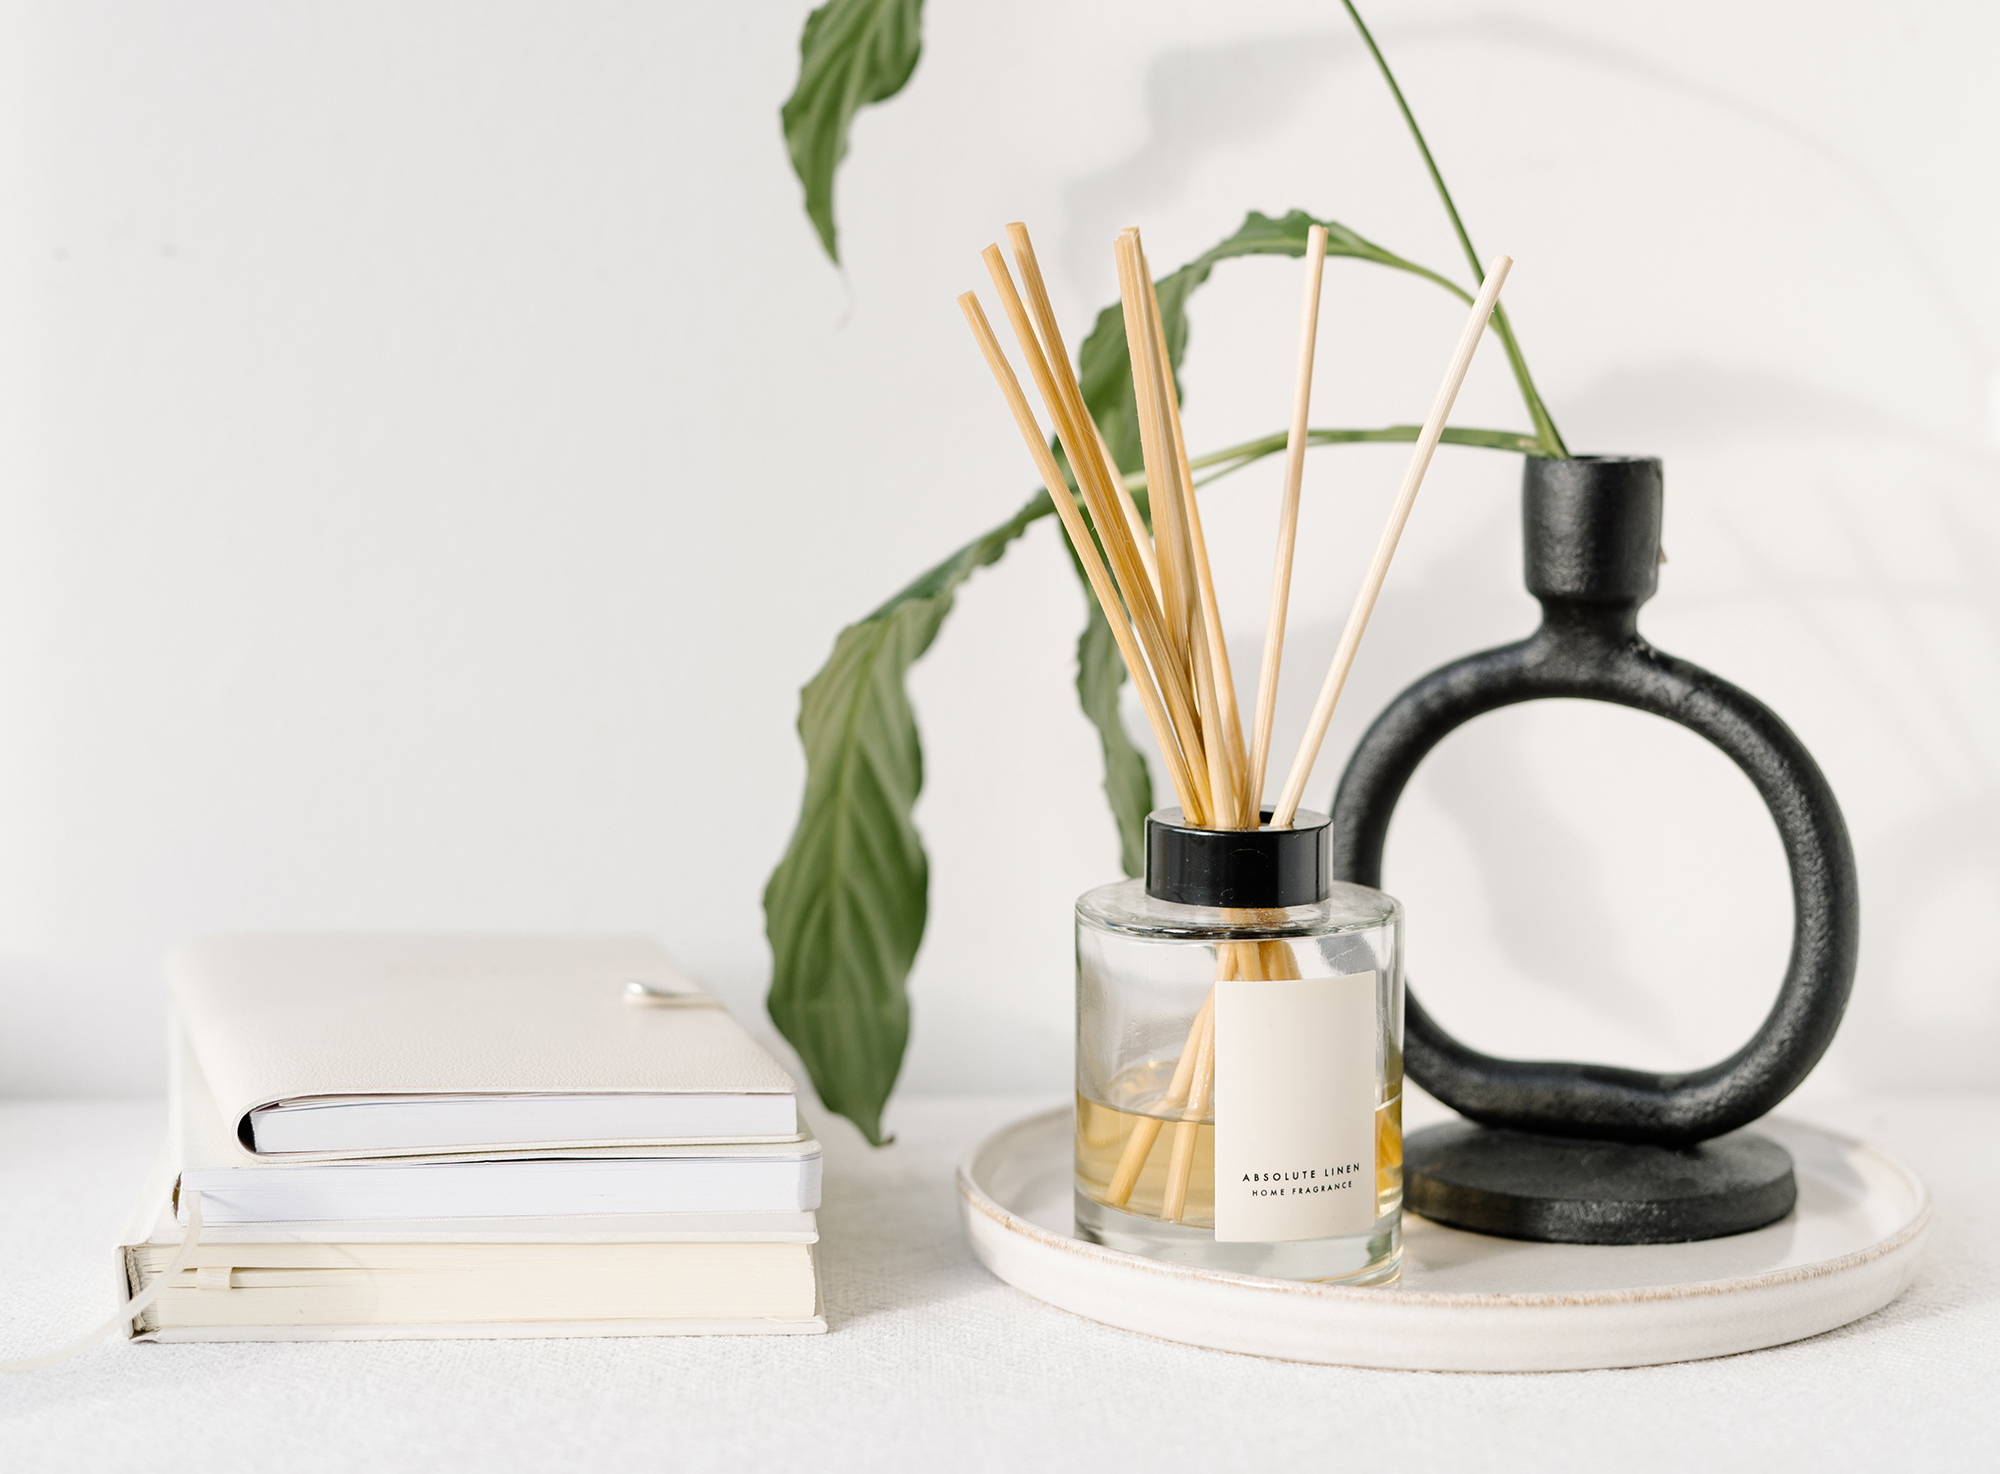 A white background with a stylish black vase and oil difuser along side books and work items